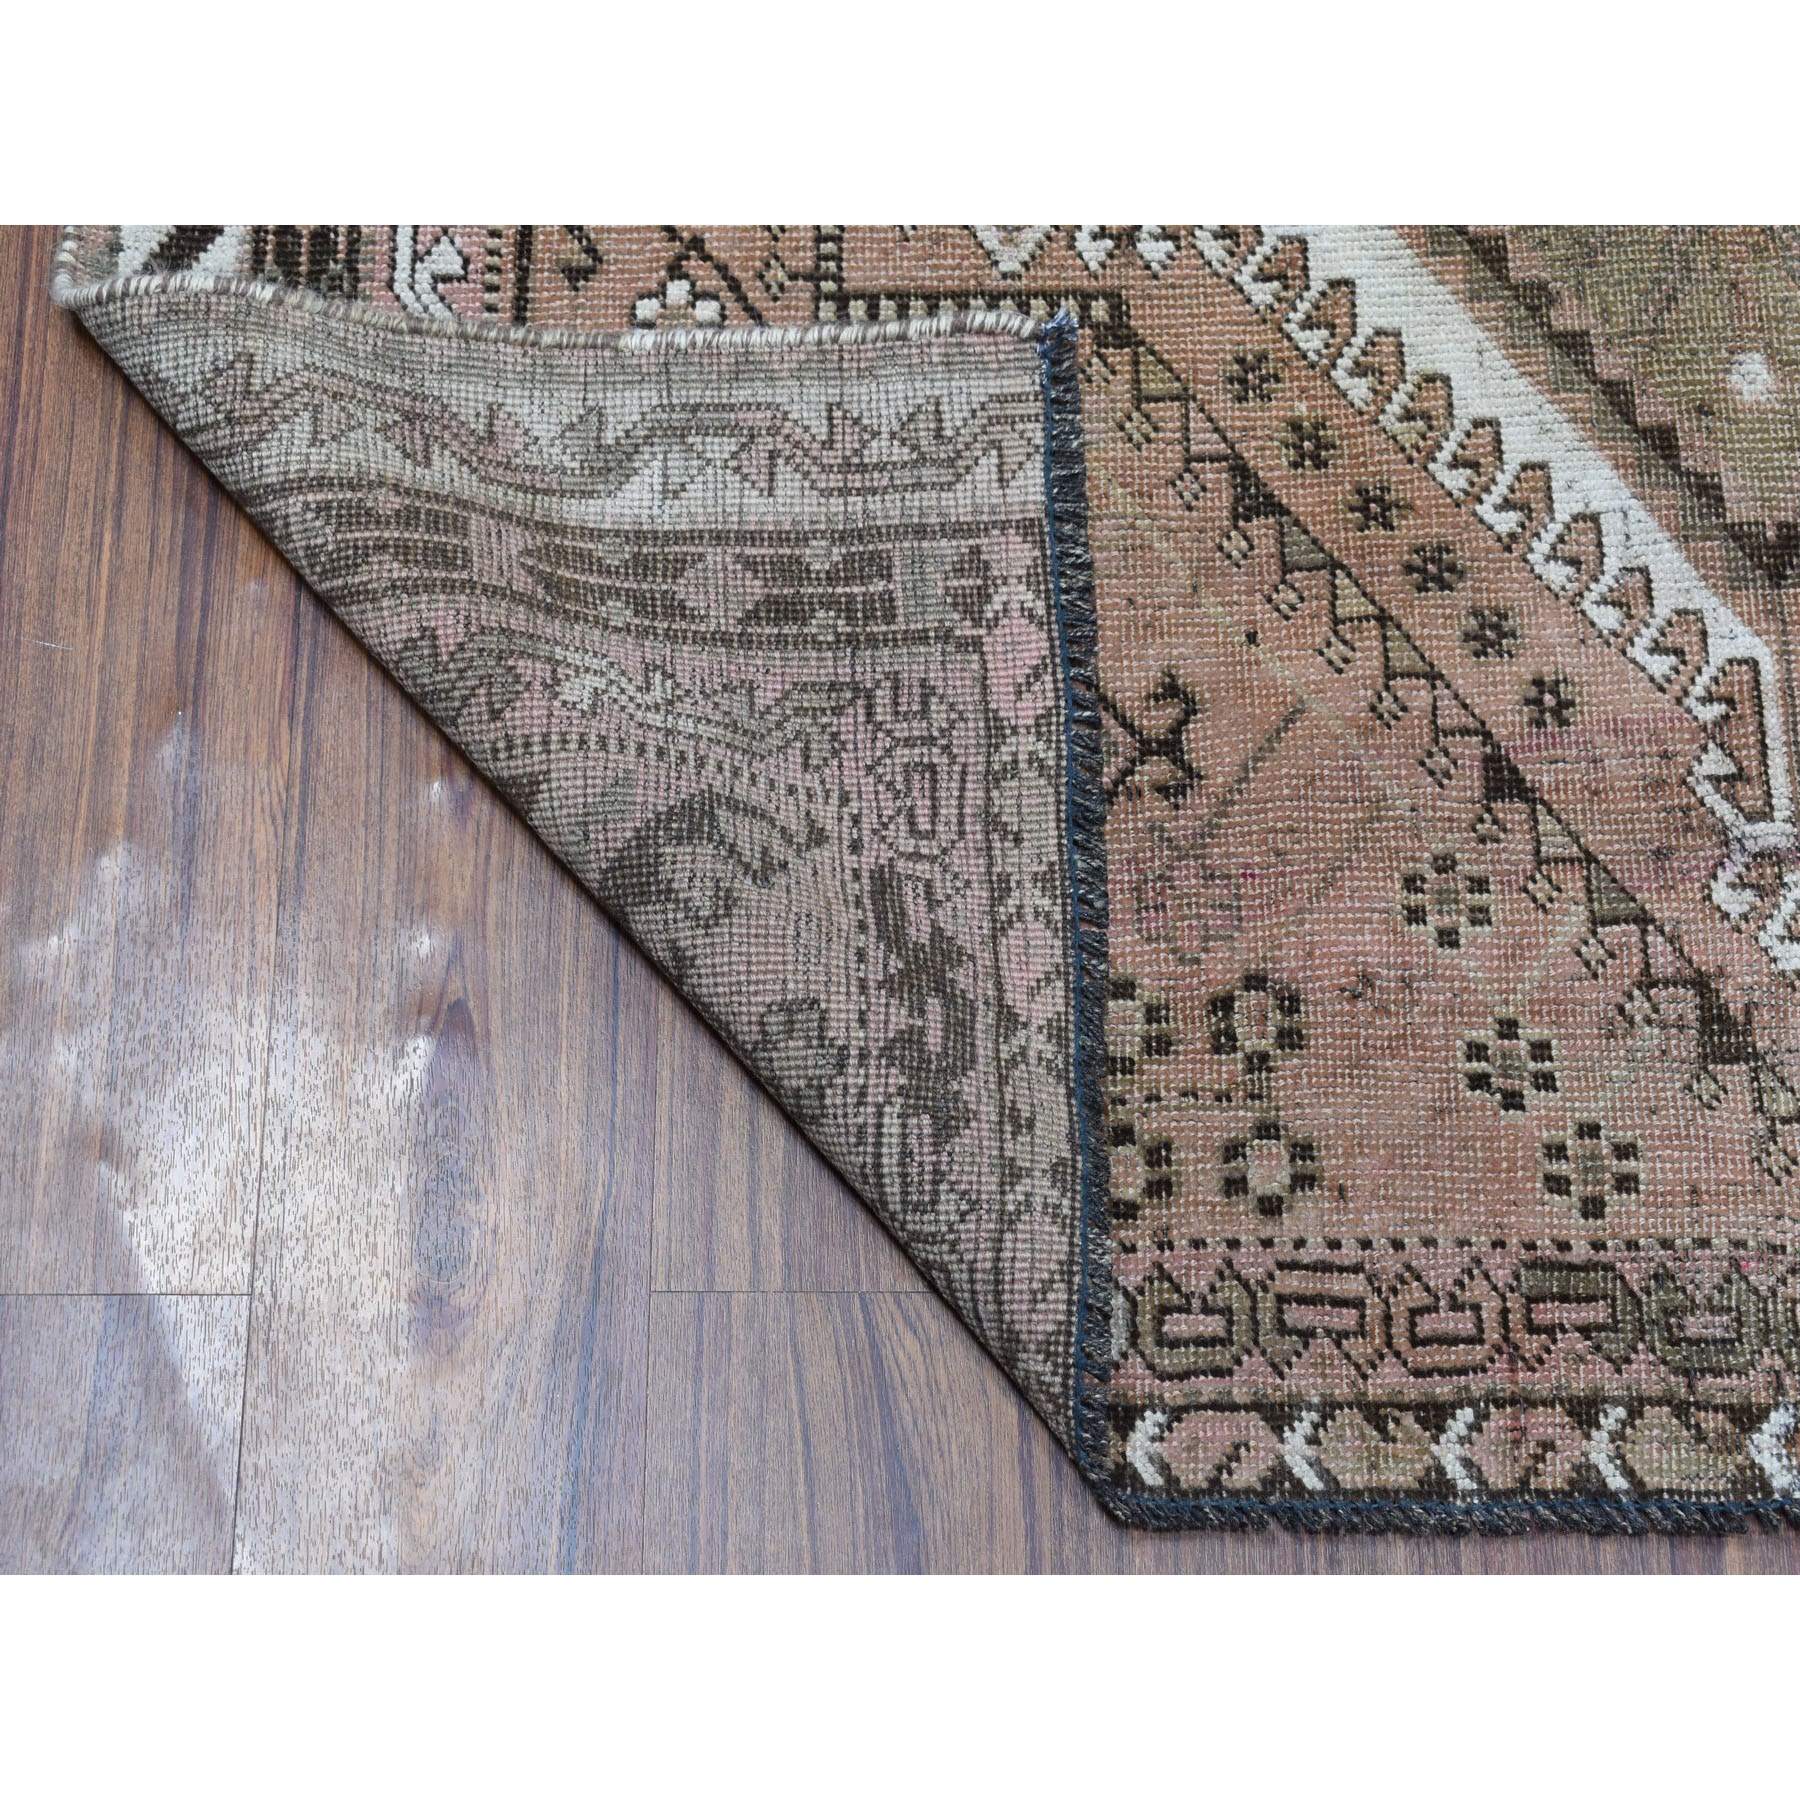 4-9 x7-7  Vintage And Worn Down Distressed Colors Persian Shiraz Hand Knotted Bohemian Rug 